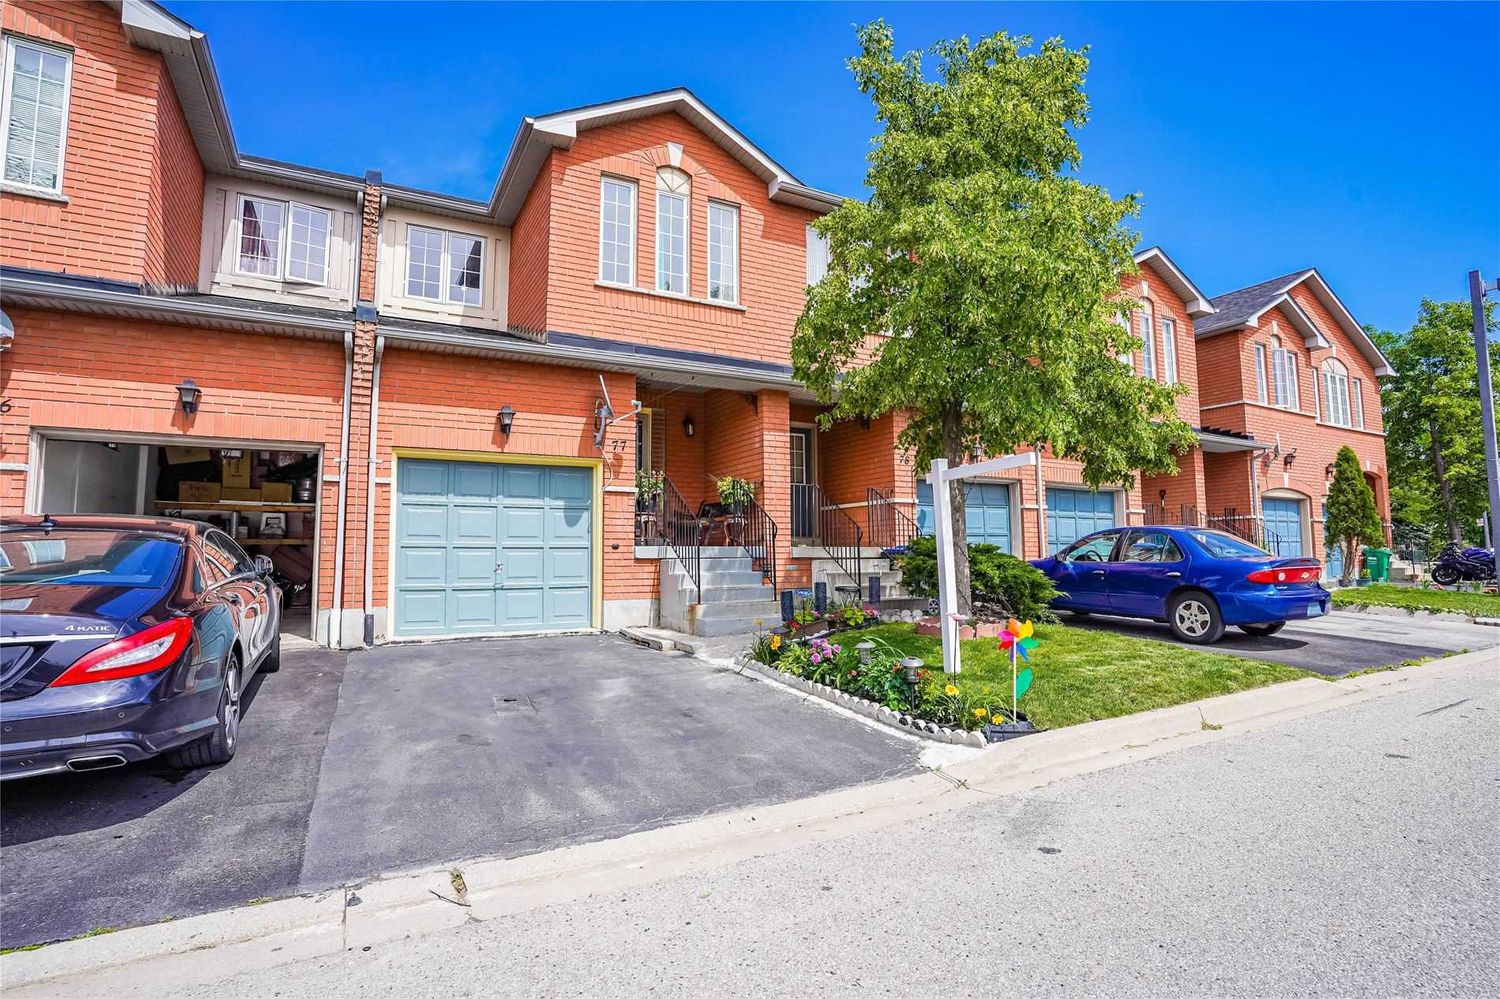 7115 Rexwood Road. 7115 Rexwood Road Townhomes is located in  Mississauga, Toronto - image #2 of 2